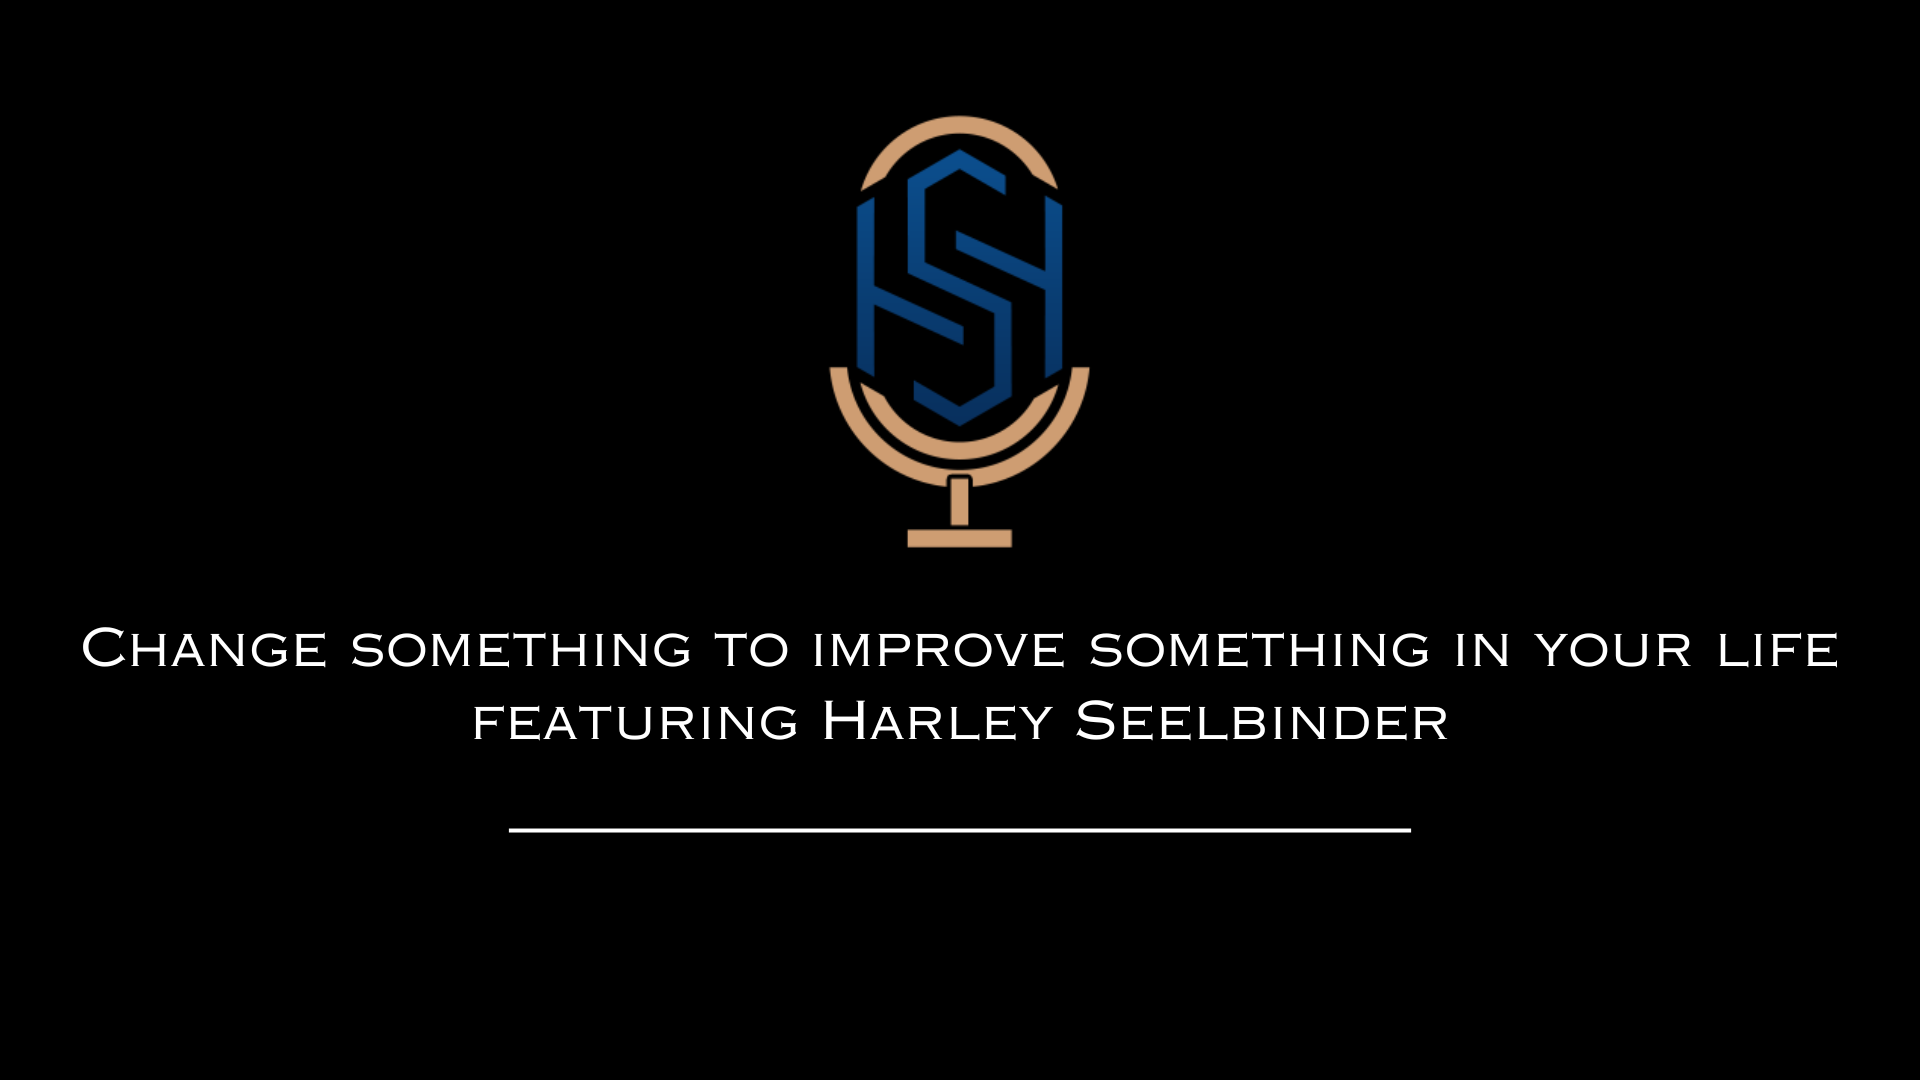 Change something to improve something in your life featuring Harley Seelbinder